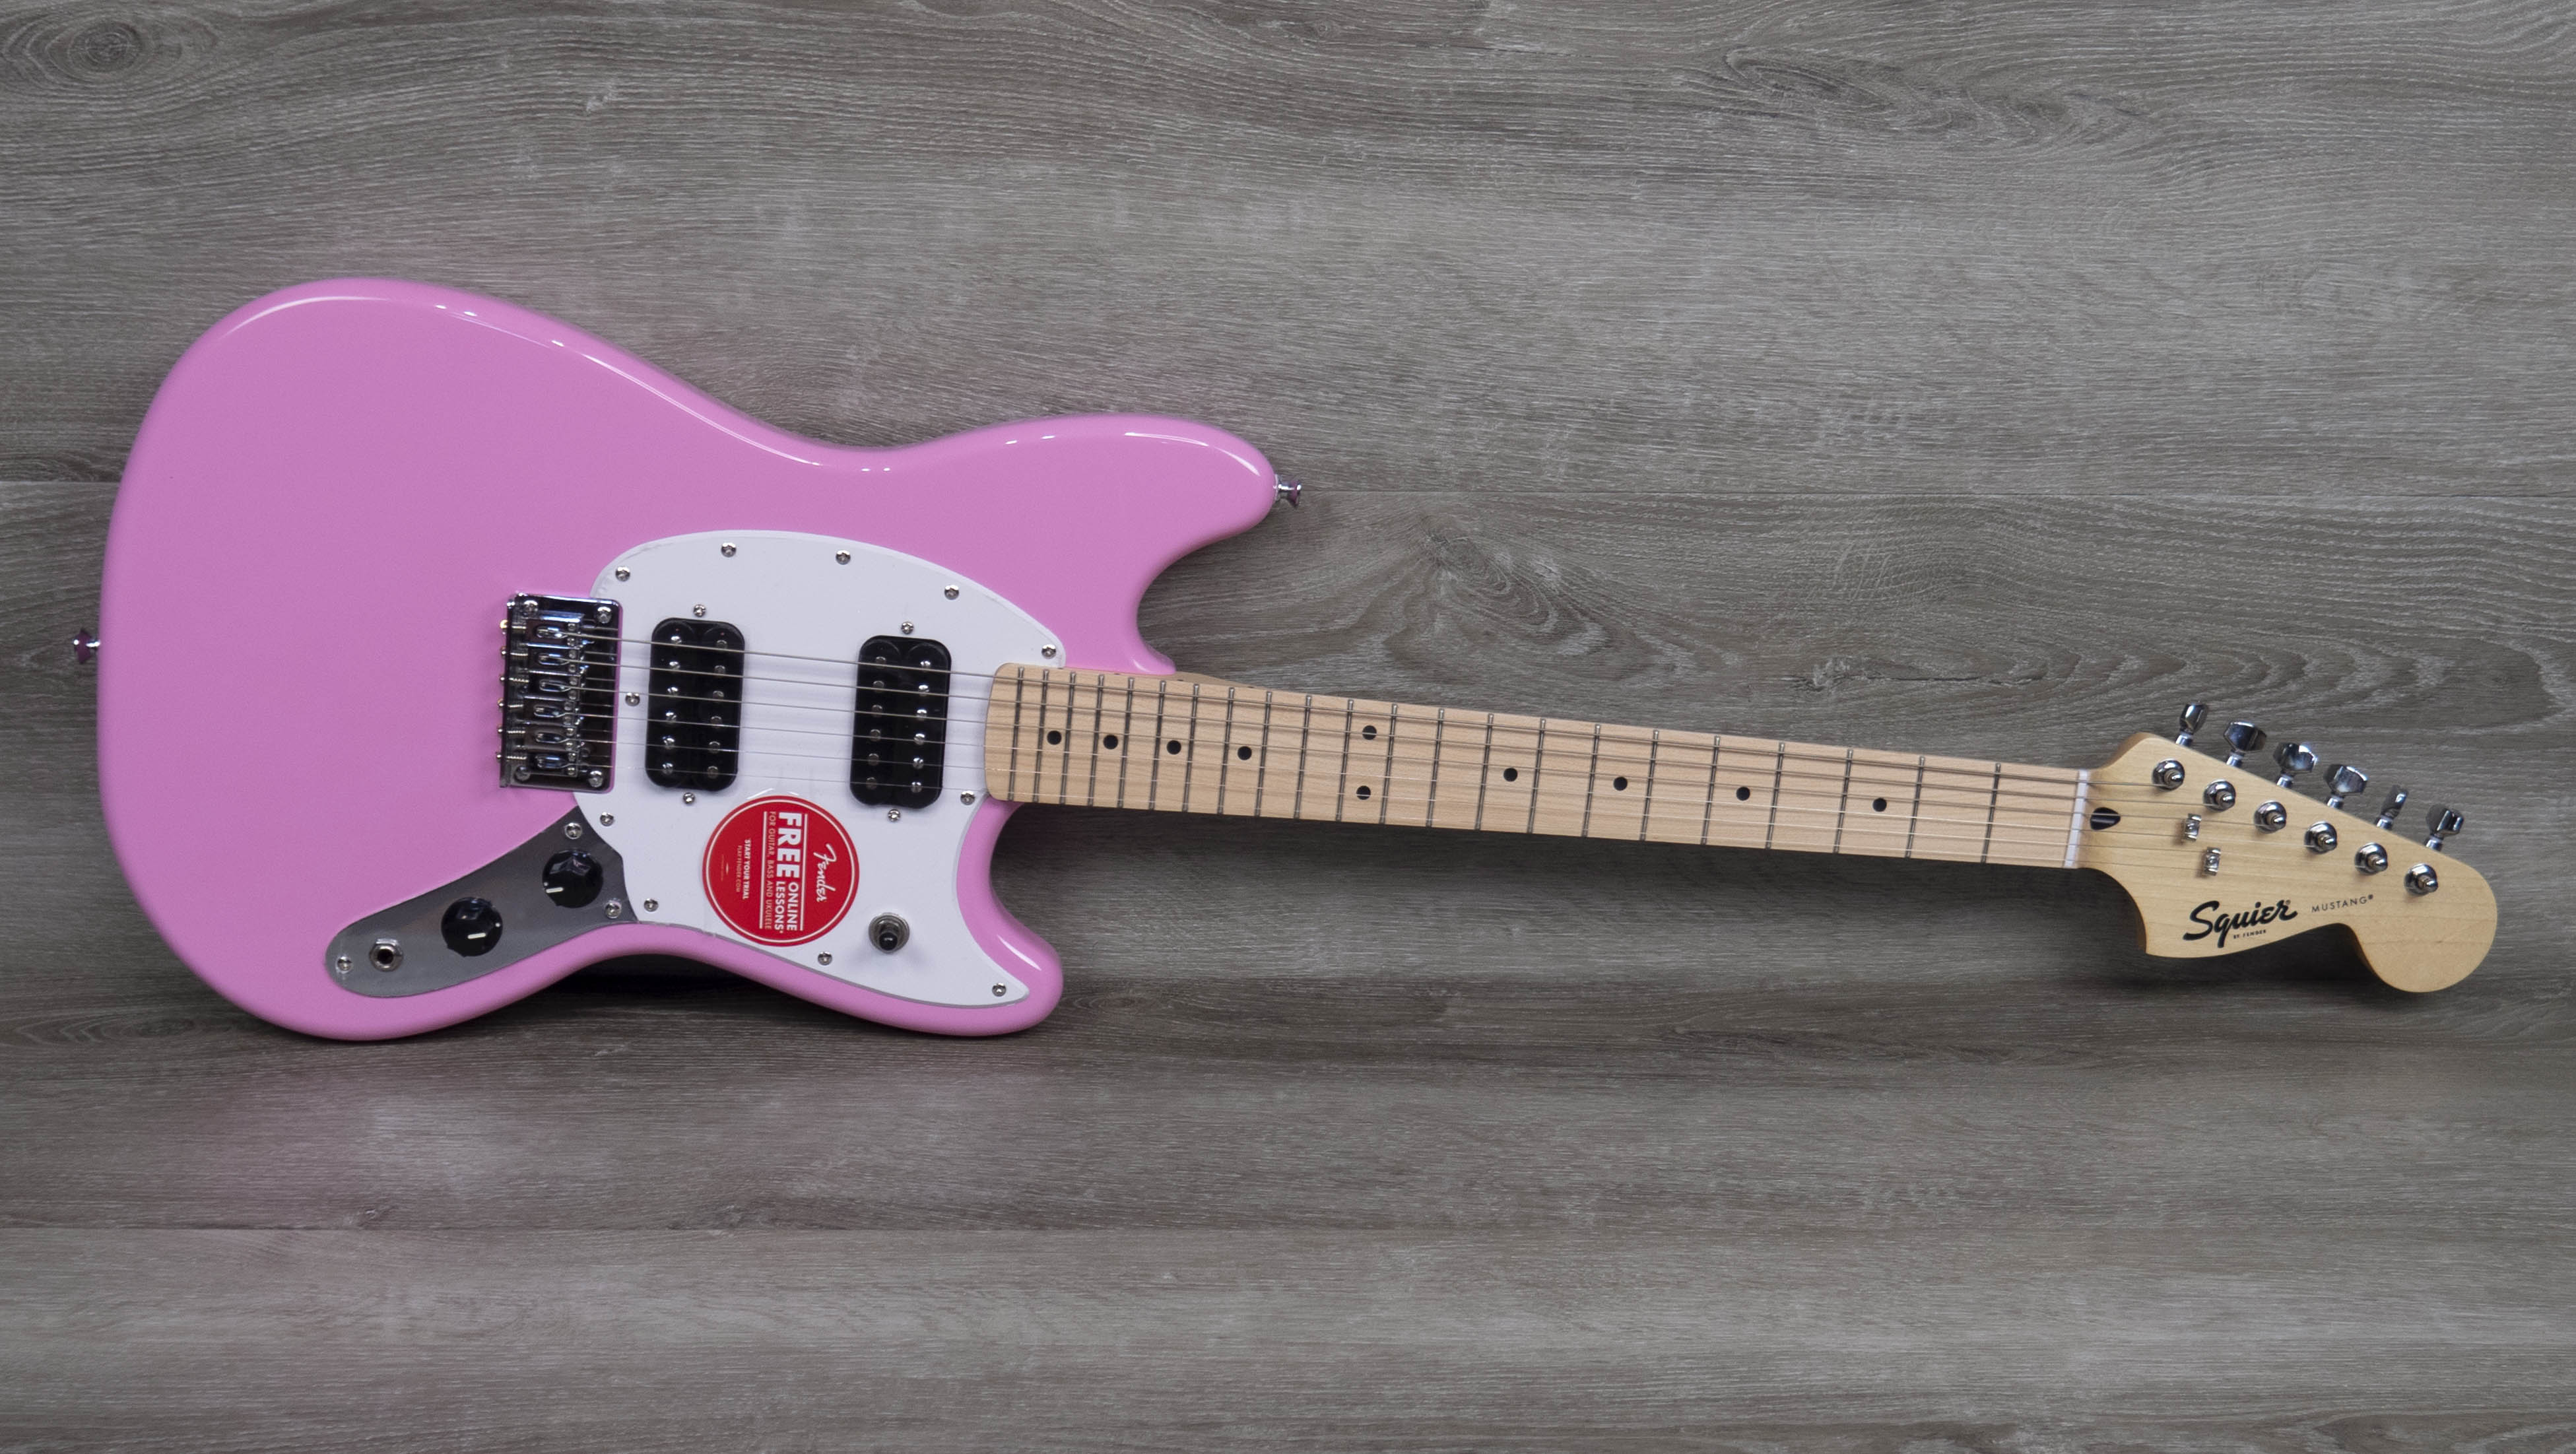 Fender Squier Sonic Mustang HH Electric Guitar Flash Pink - 0373702555